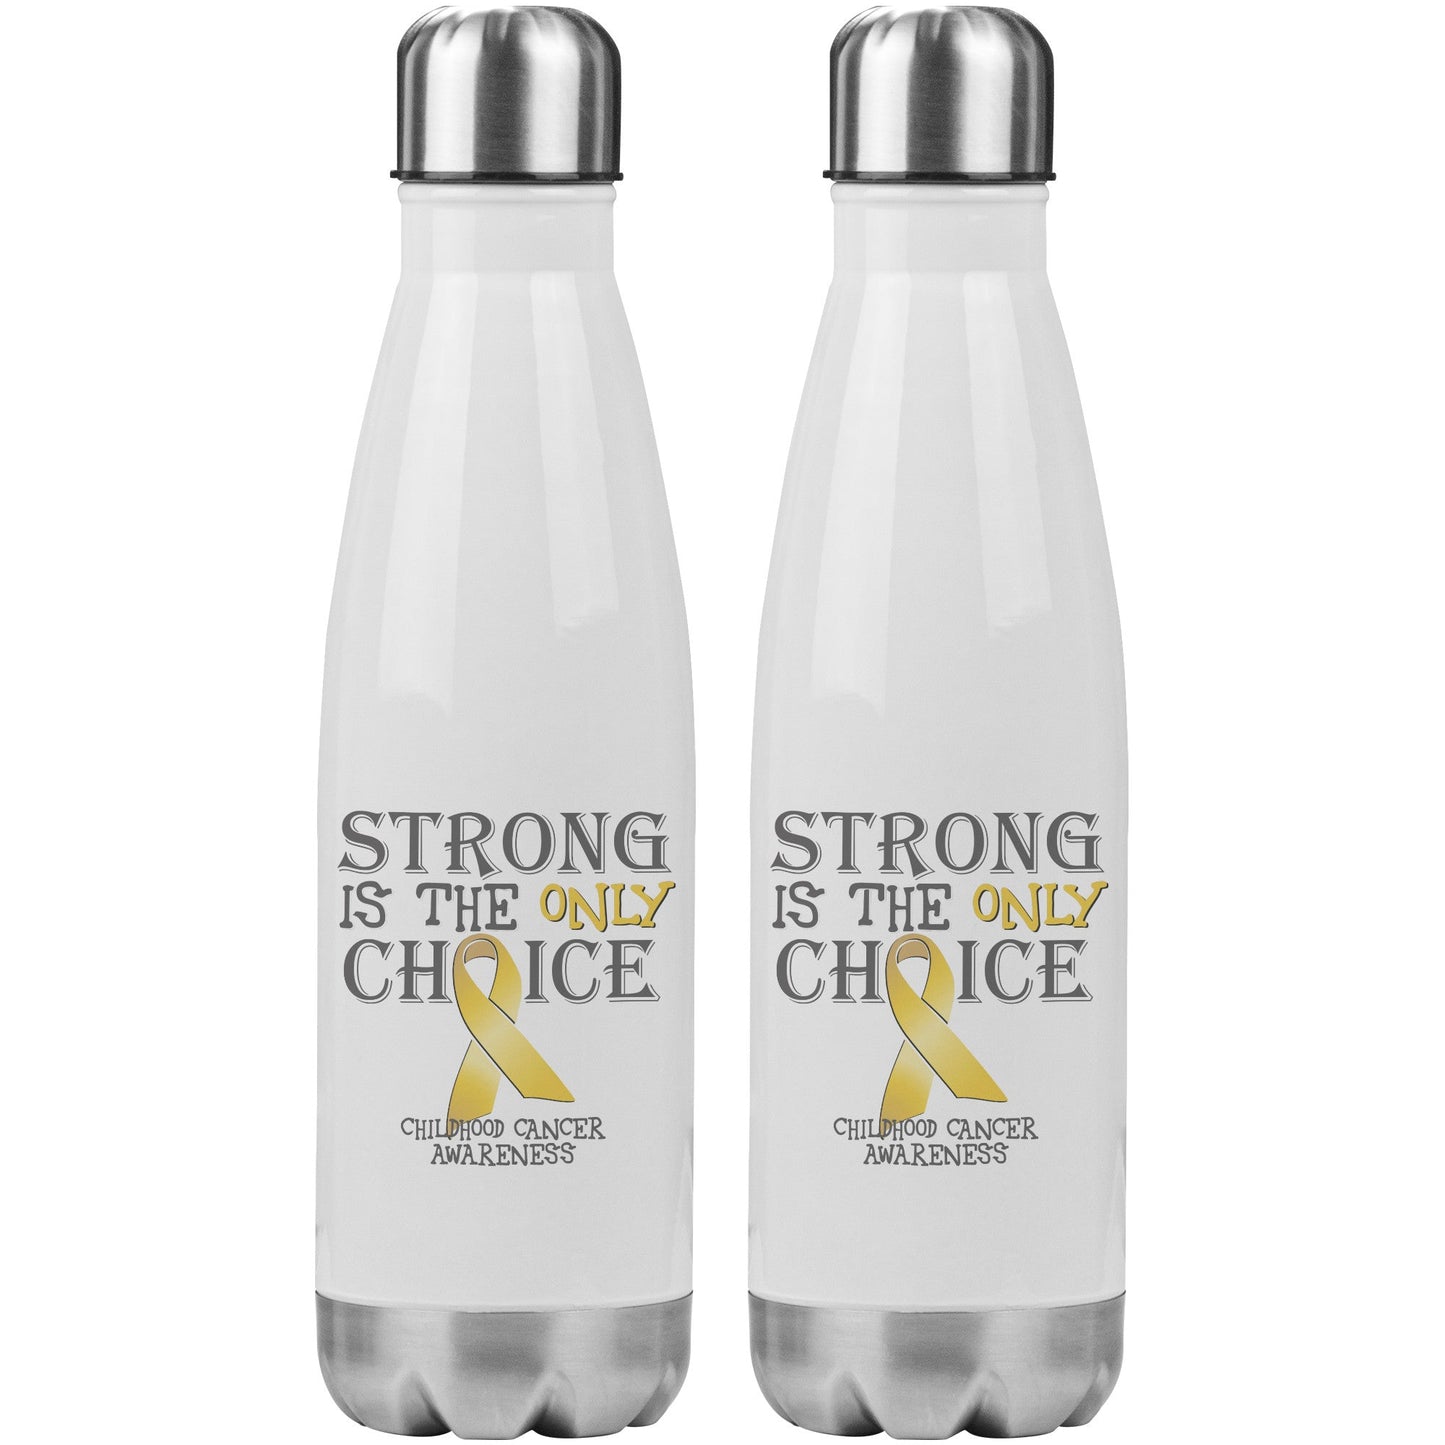 Strong is the Only Choice -Childhood Cancer Awareness 20oz Insulated Water Bottle |x|